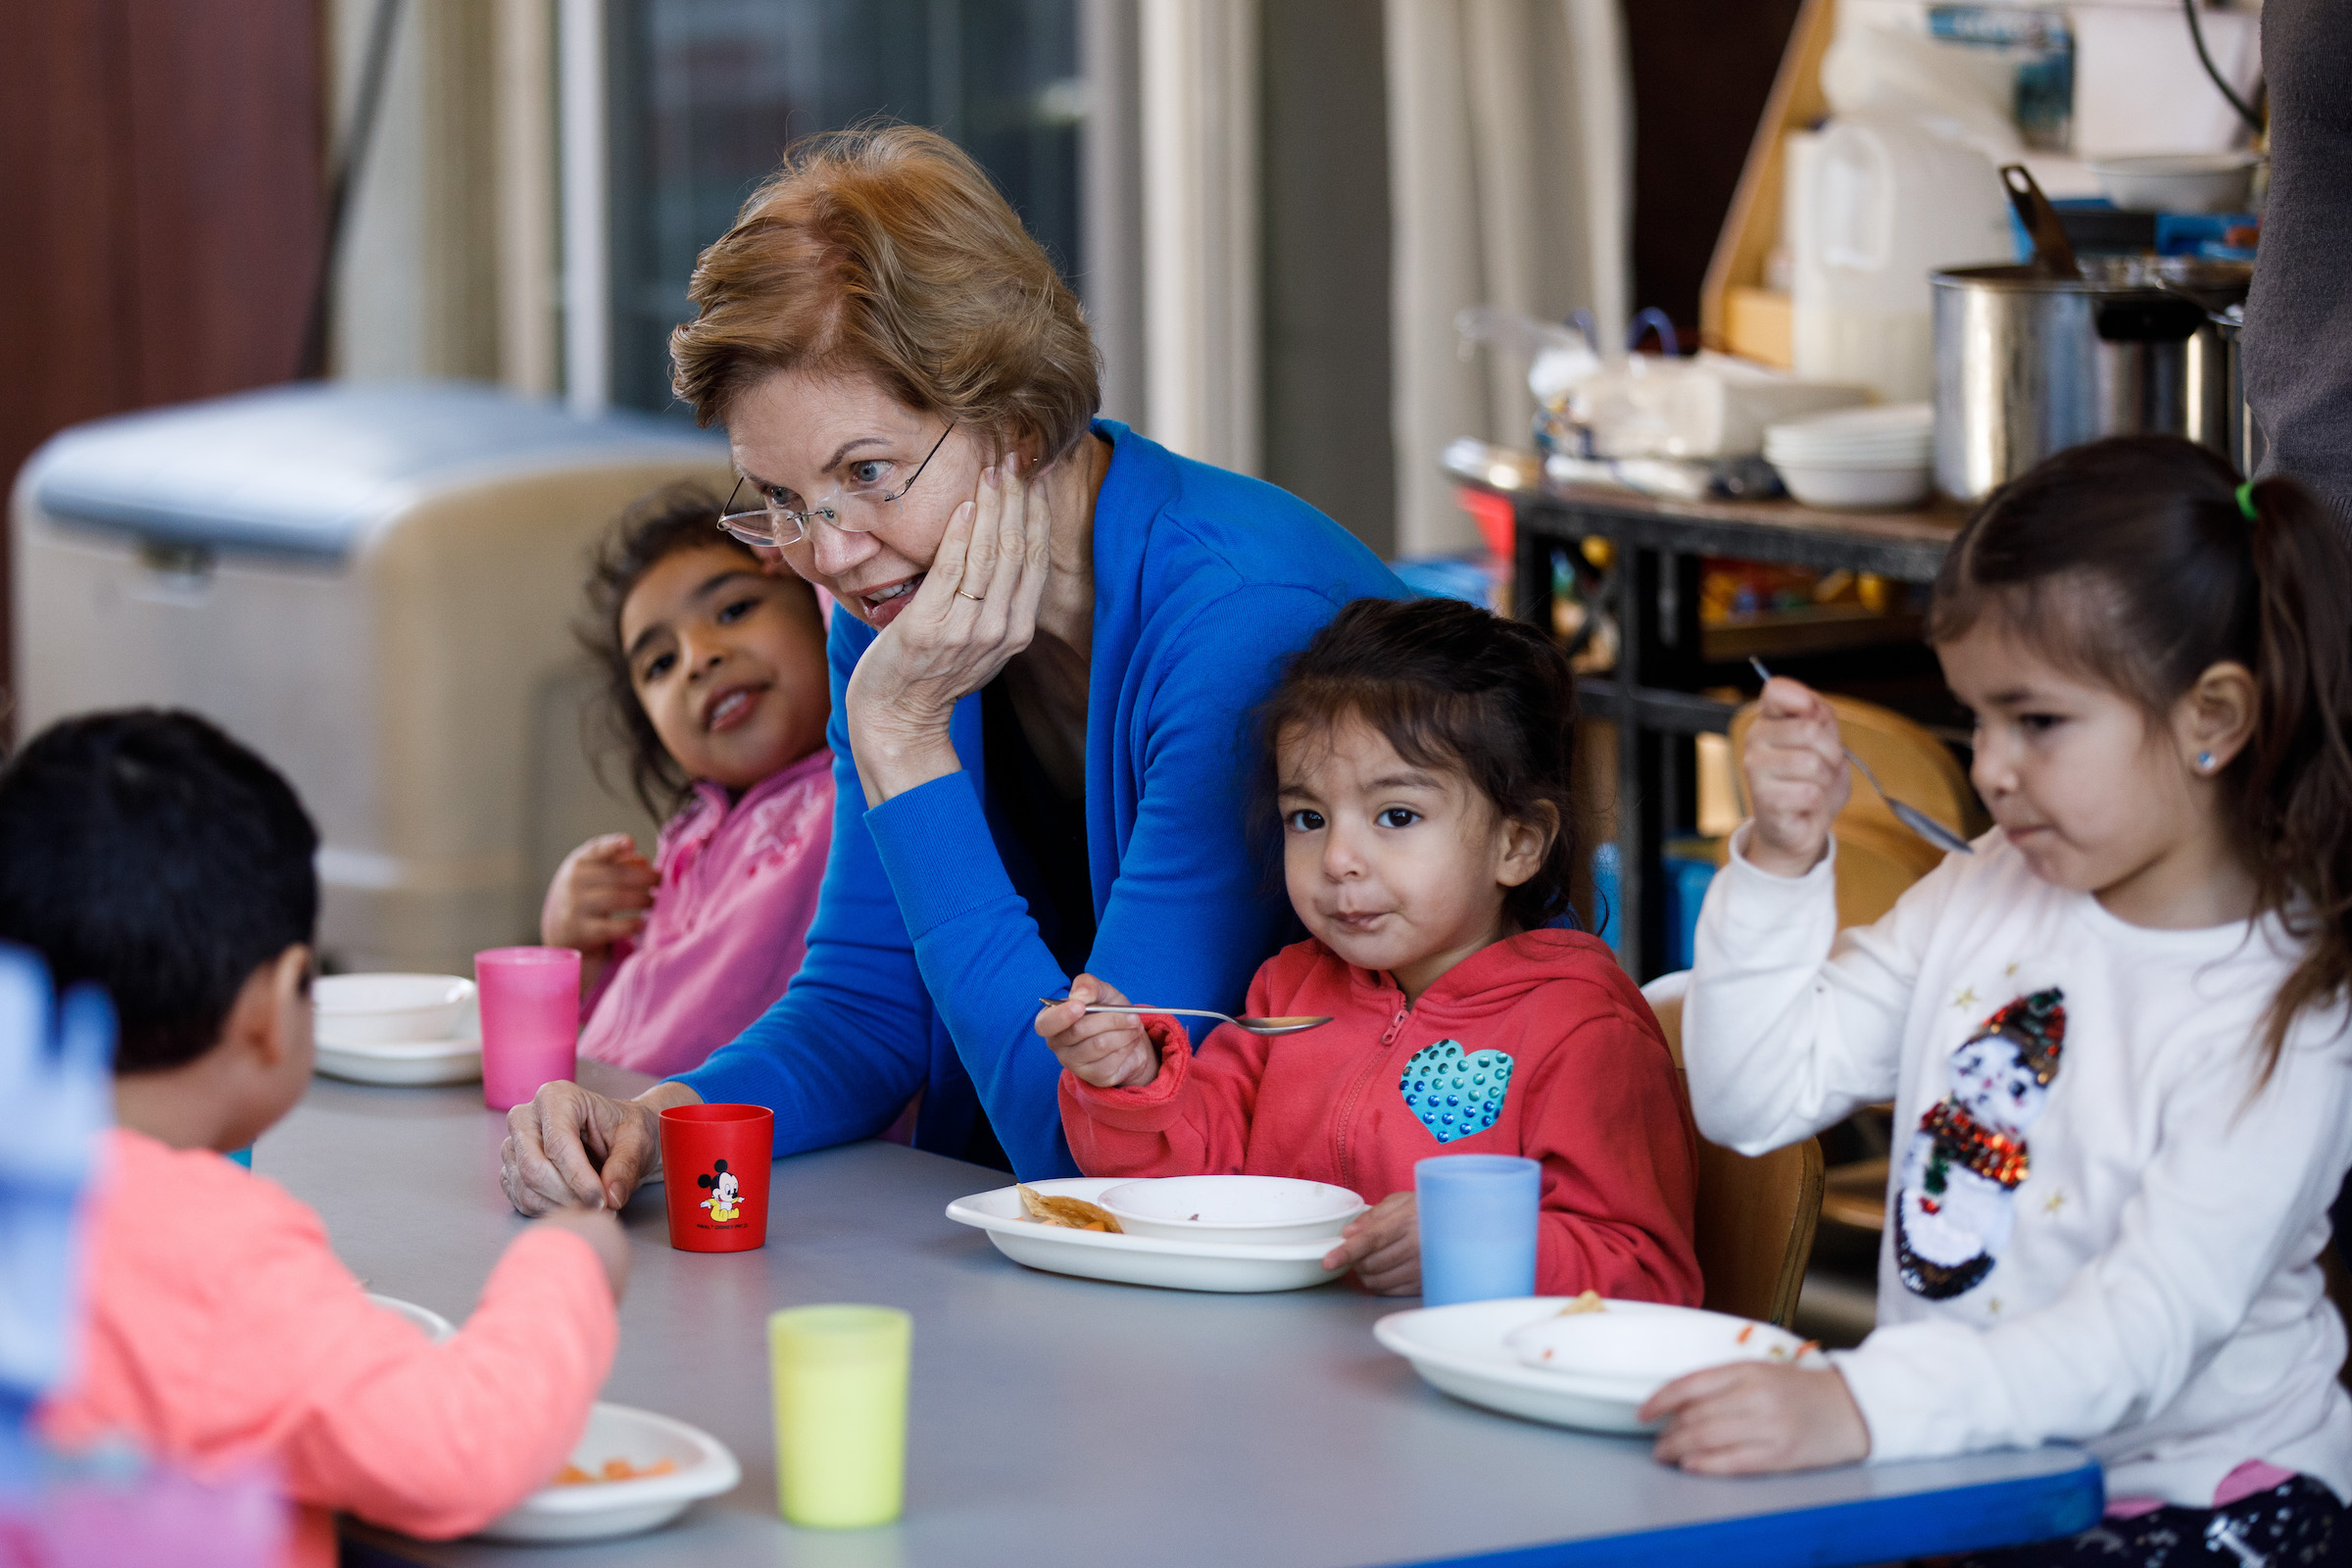 Sen. Elizabeth Warren interacts with children during her campaign event at Wise and Wonderful Daycare and Preschool in San Jose, California, on Dec. 27, 2019.